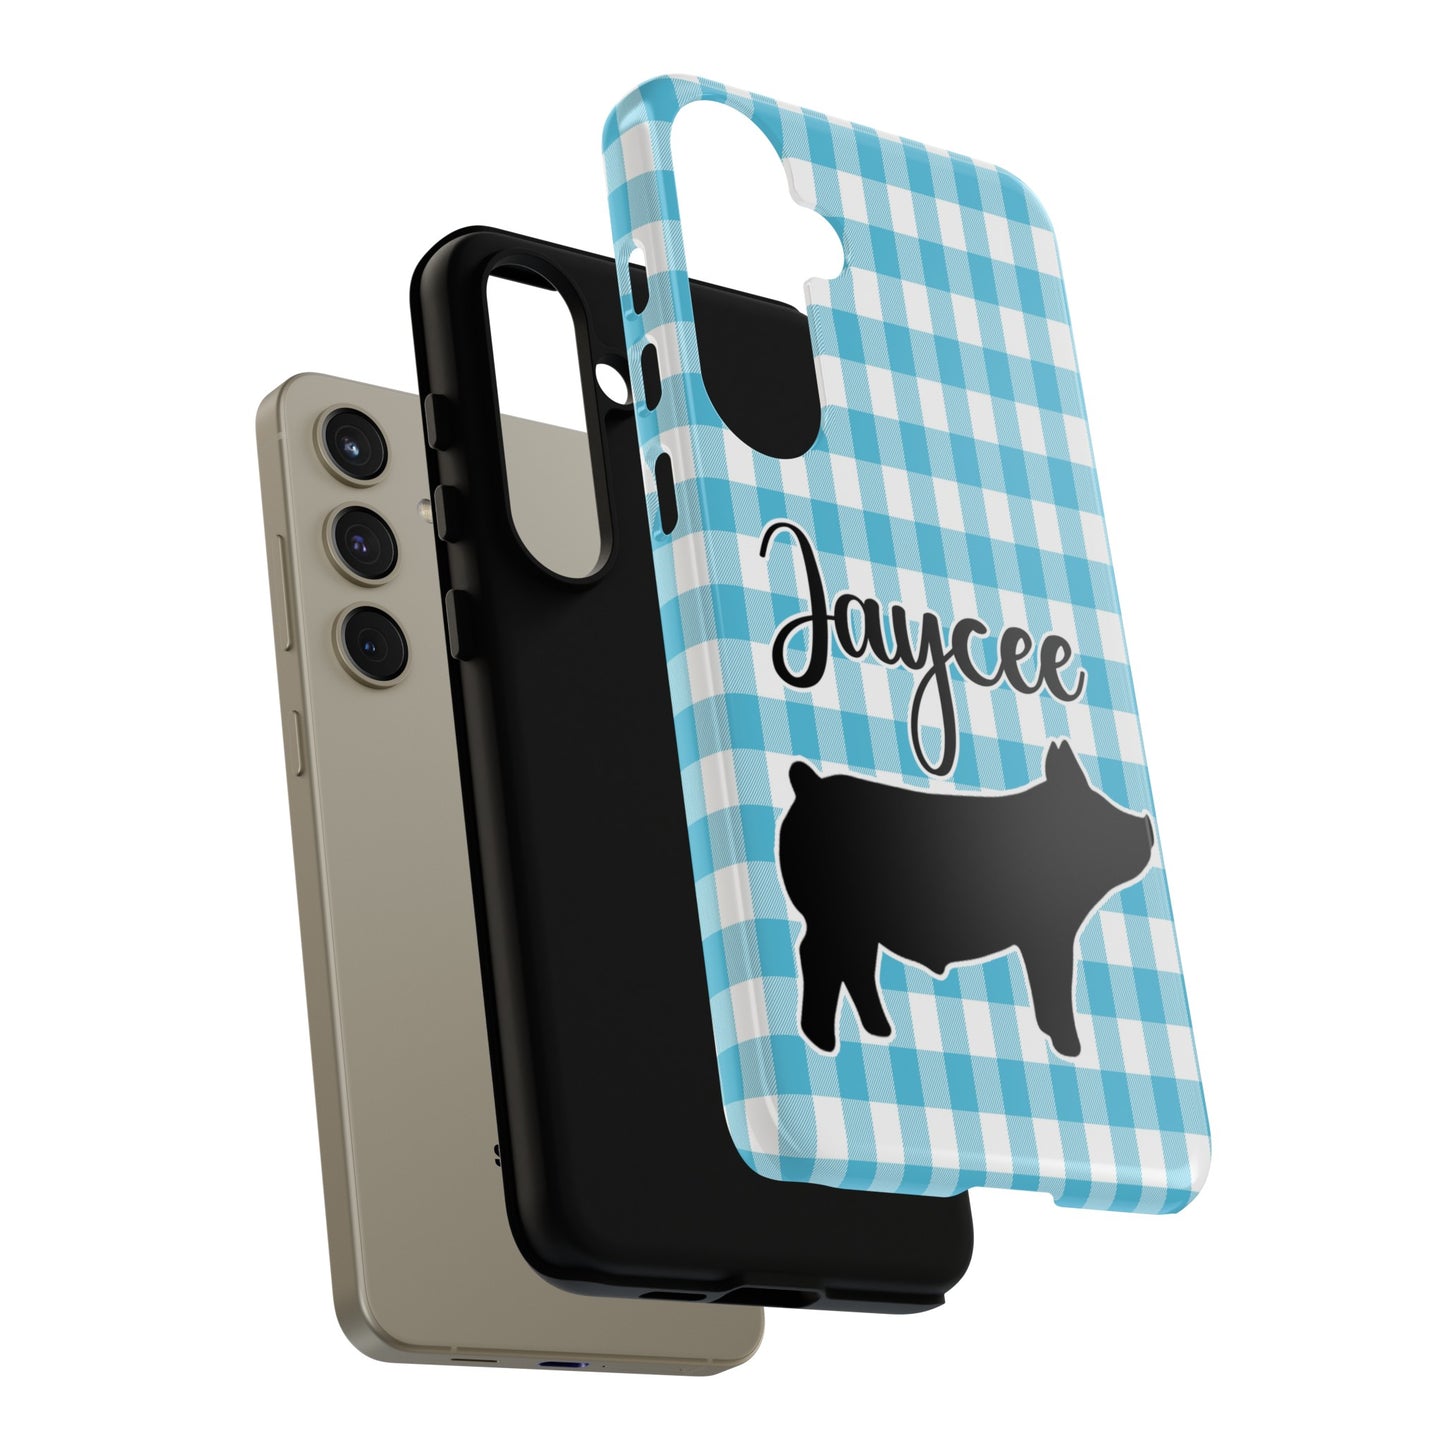 Livestock Show Pig - Show Swine Phone Cases - Android Pig Phones Cases